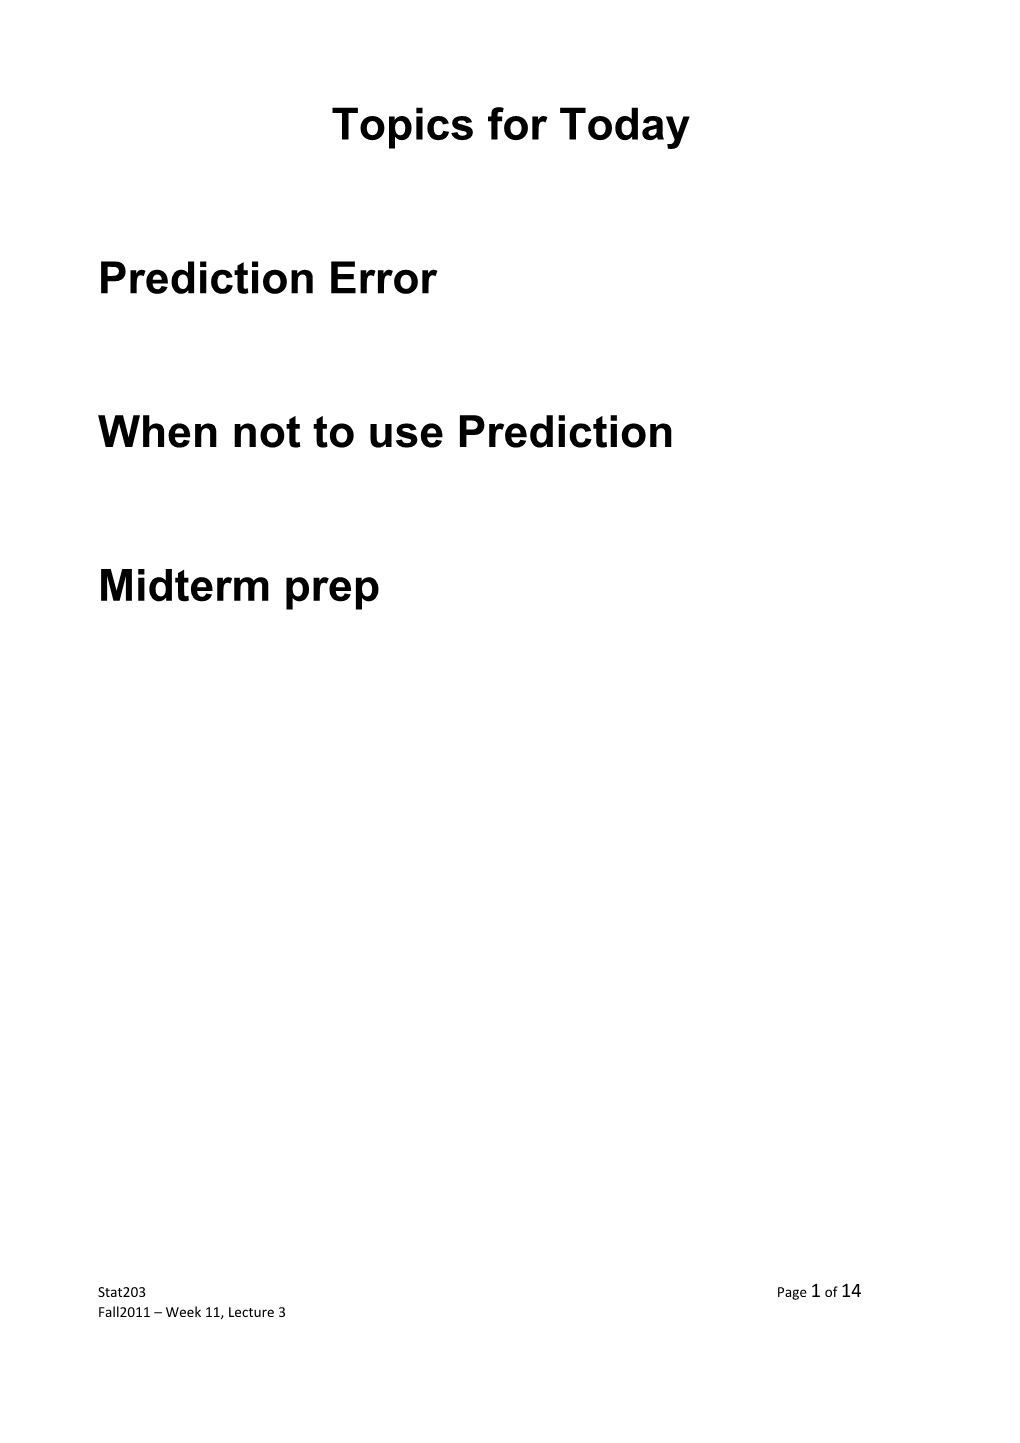 When Not to Use Prediction